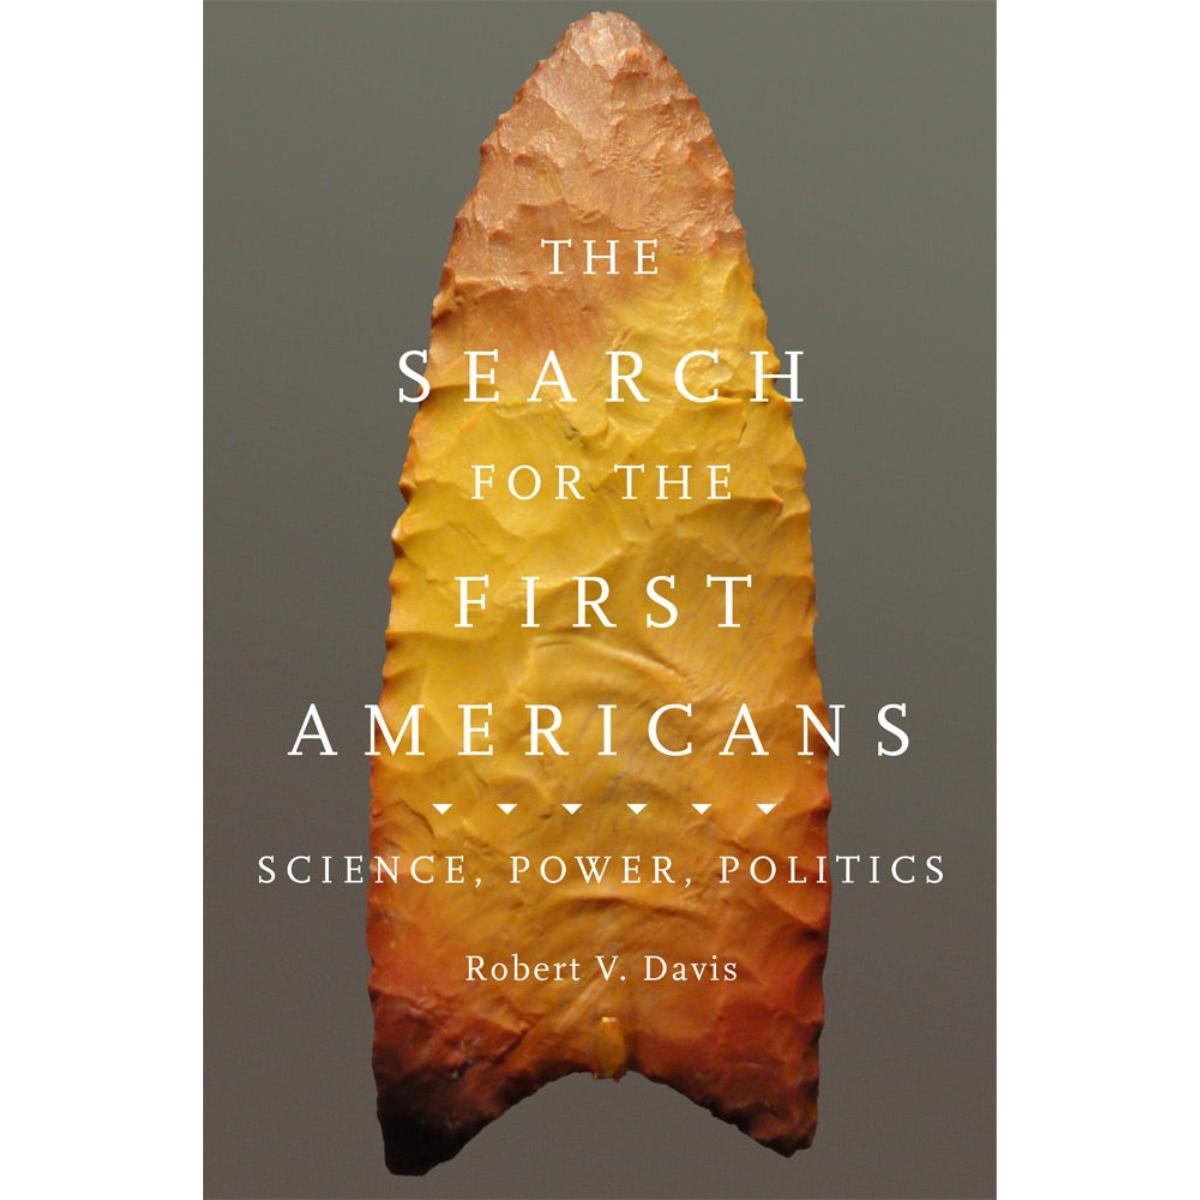 The Search for the First Americans